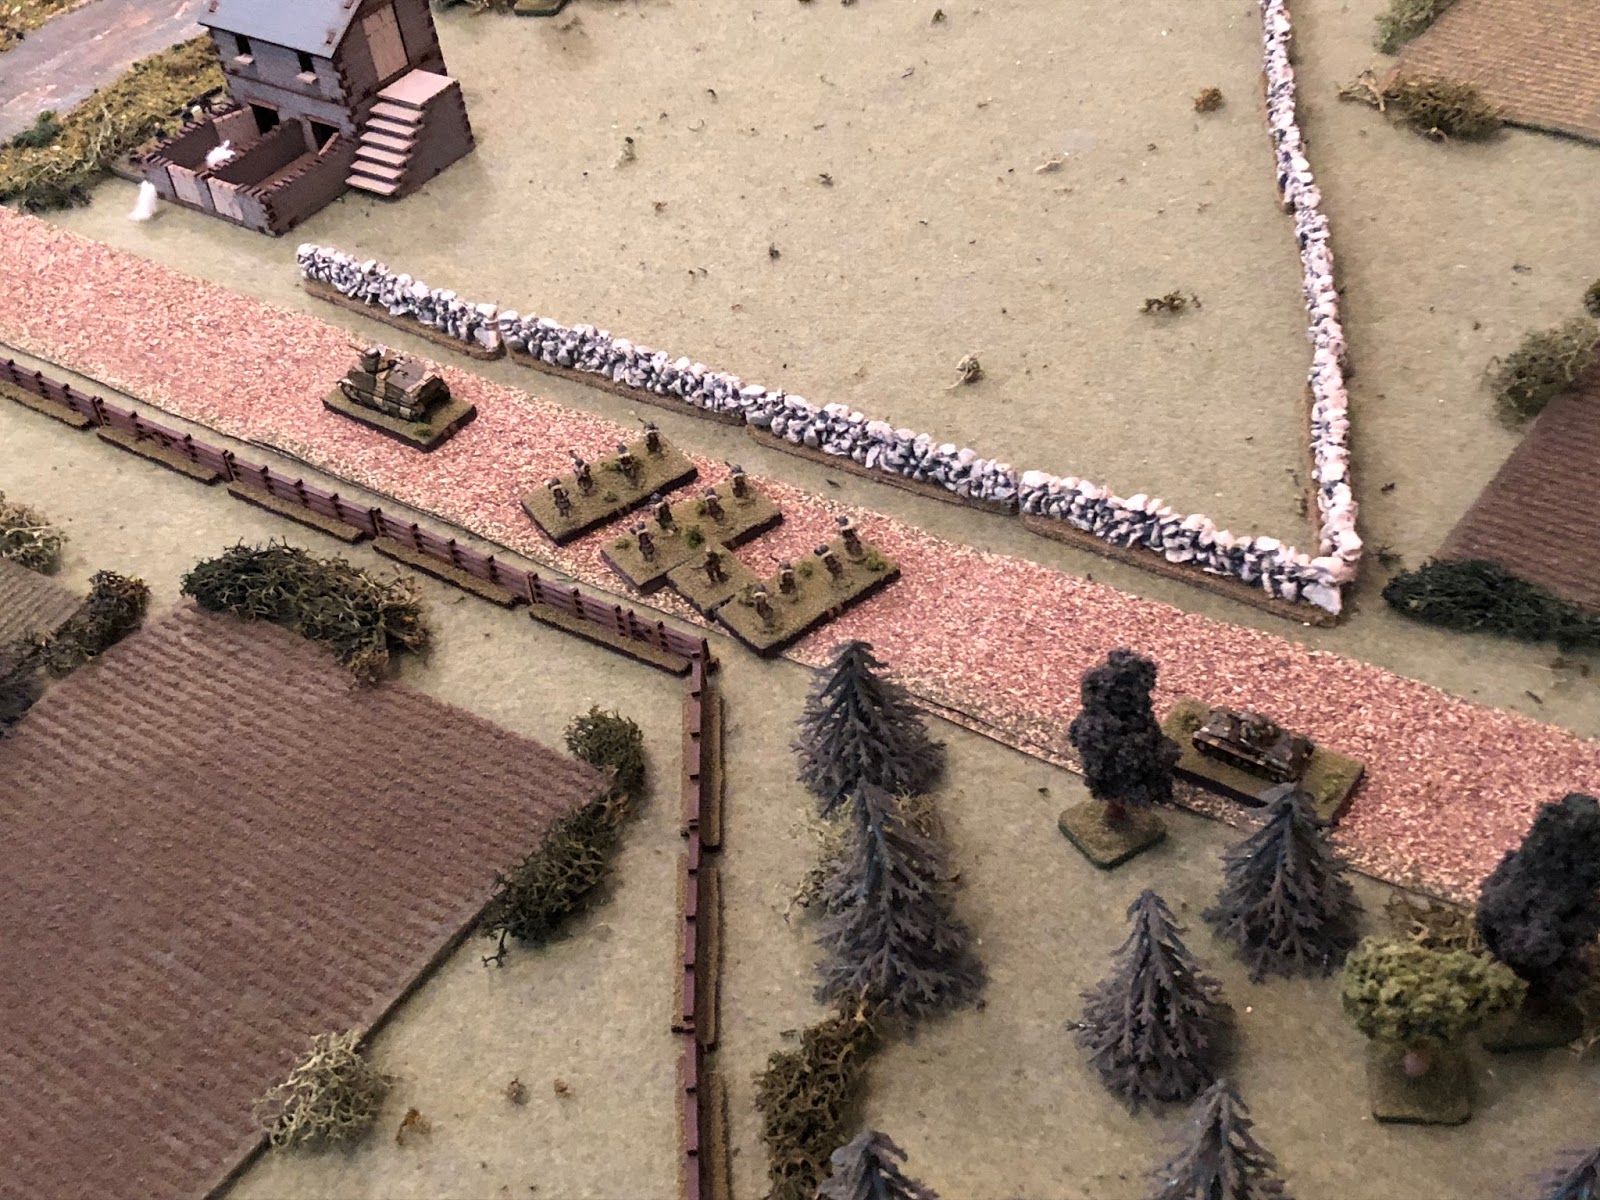  ut while that's going on, the French 2nd Platoon commander kicks his men in the rear and gets them double-timing east down main street, pulling up behind the Somua.   